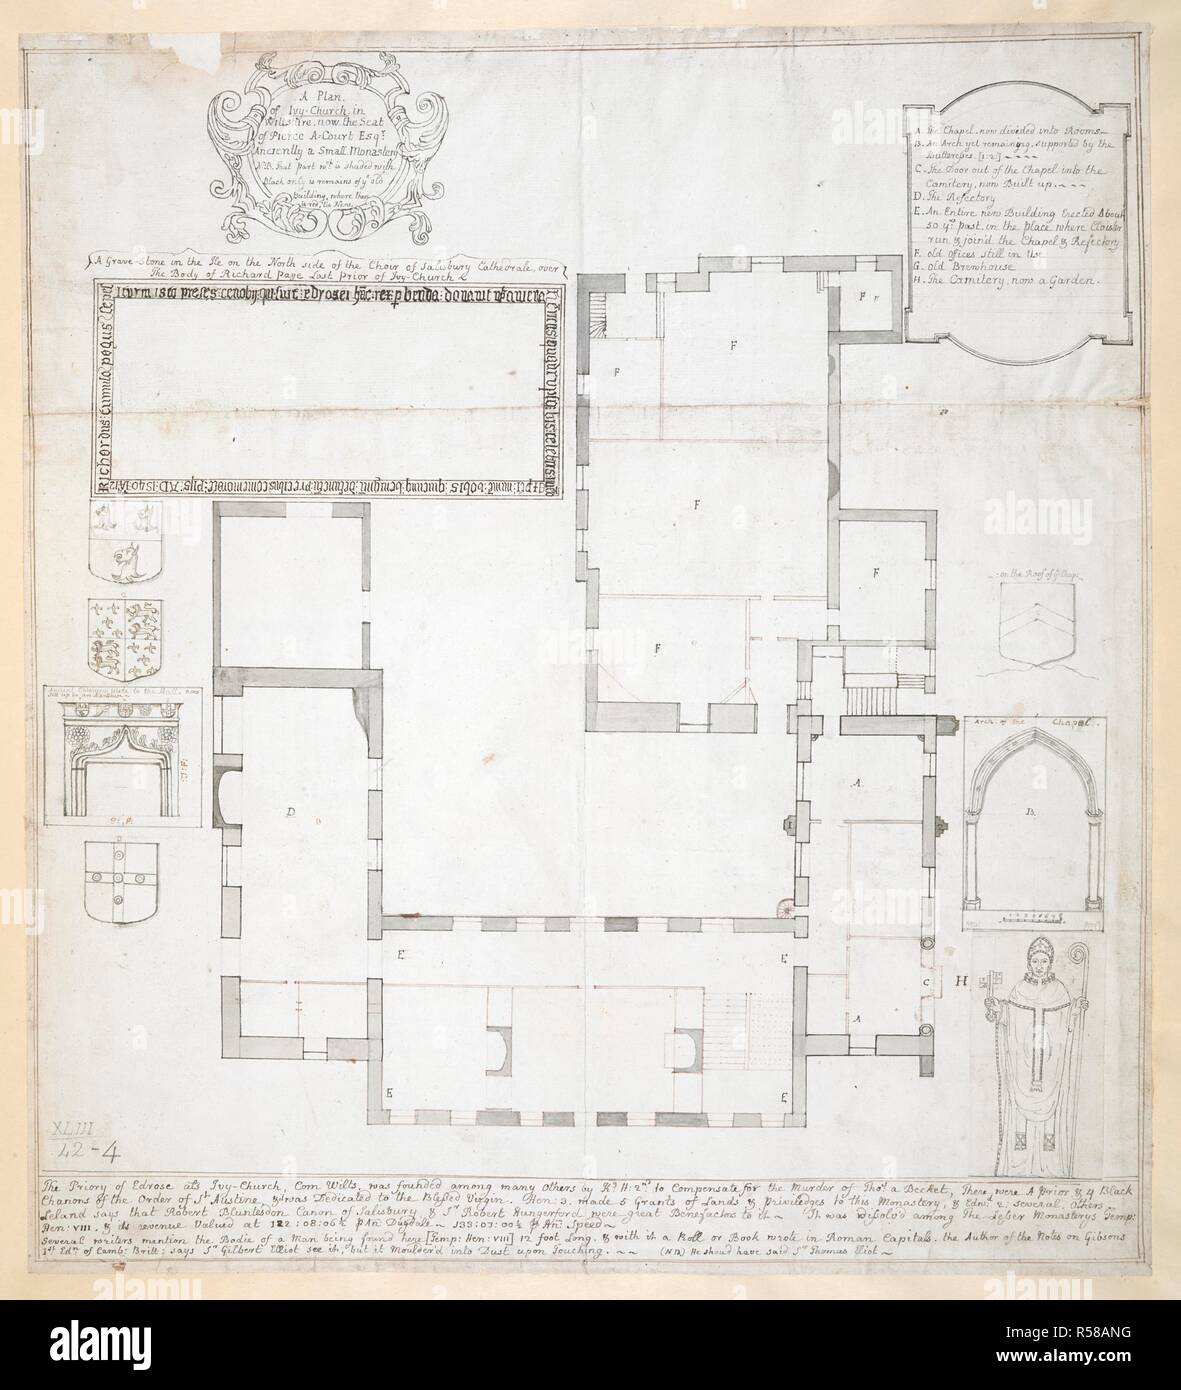 A plan, in Indian ink, of Ivy Church, in the parish of Alderbury. A Plan of Ivy-Church in Wiltshire : now the Seat of Pierce A'Court Esqr. Anciently a Small Monastery. [England] : [publisher not identified], [between 1720 and 1780?]. Source: Maps K.Top.43.42.4. Language: English. Stock Photo